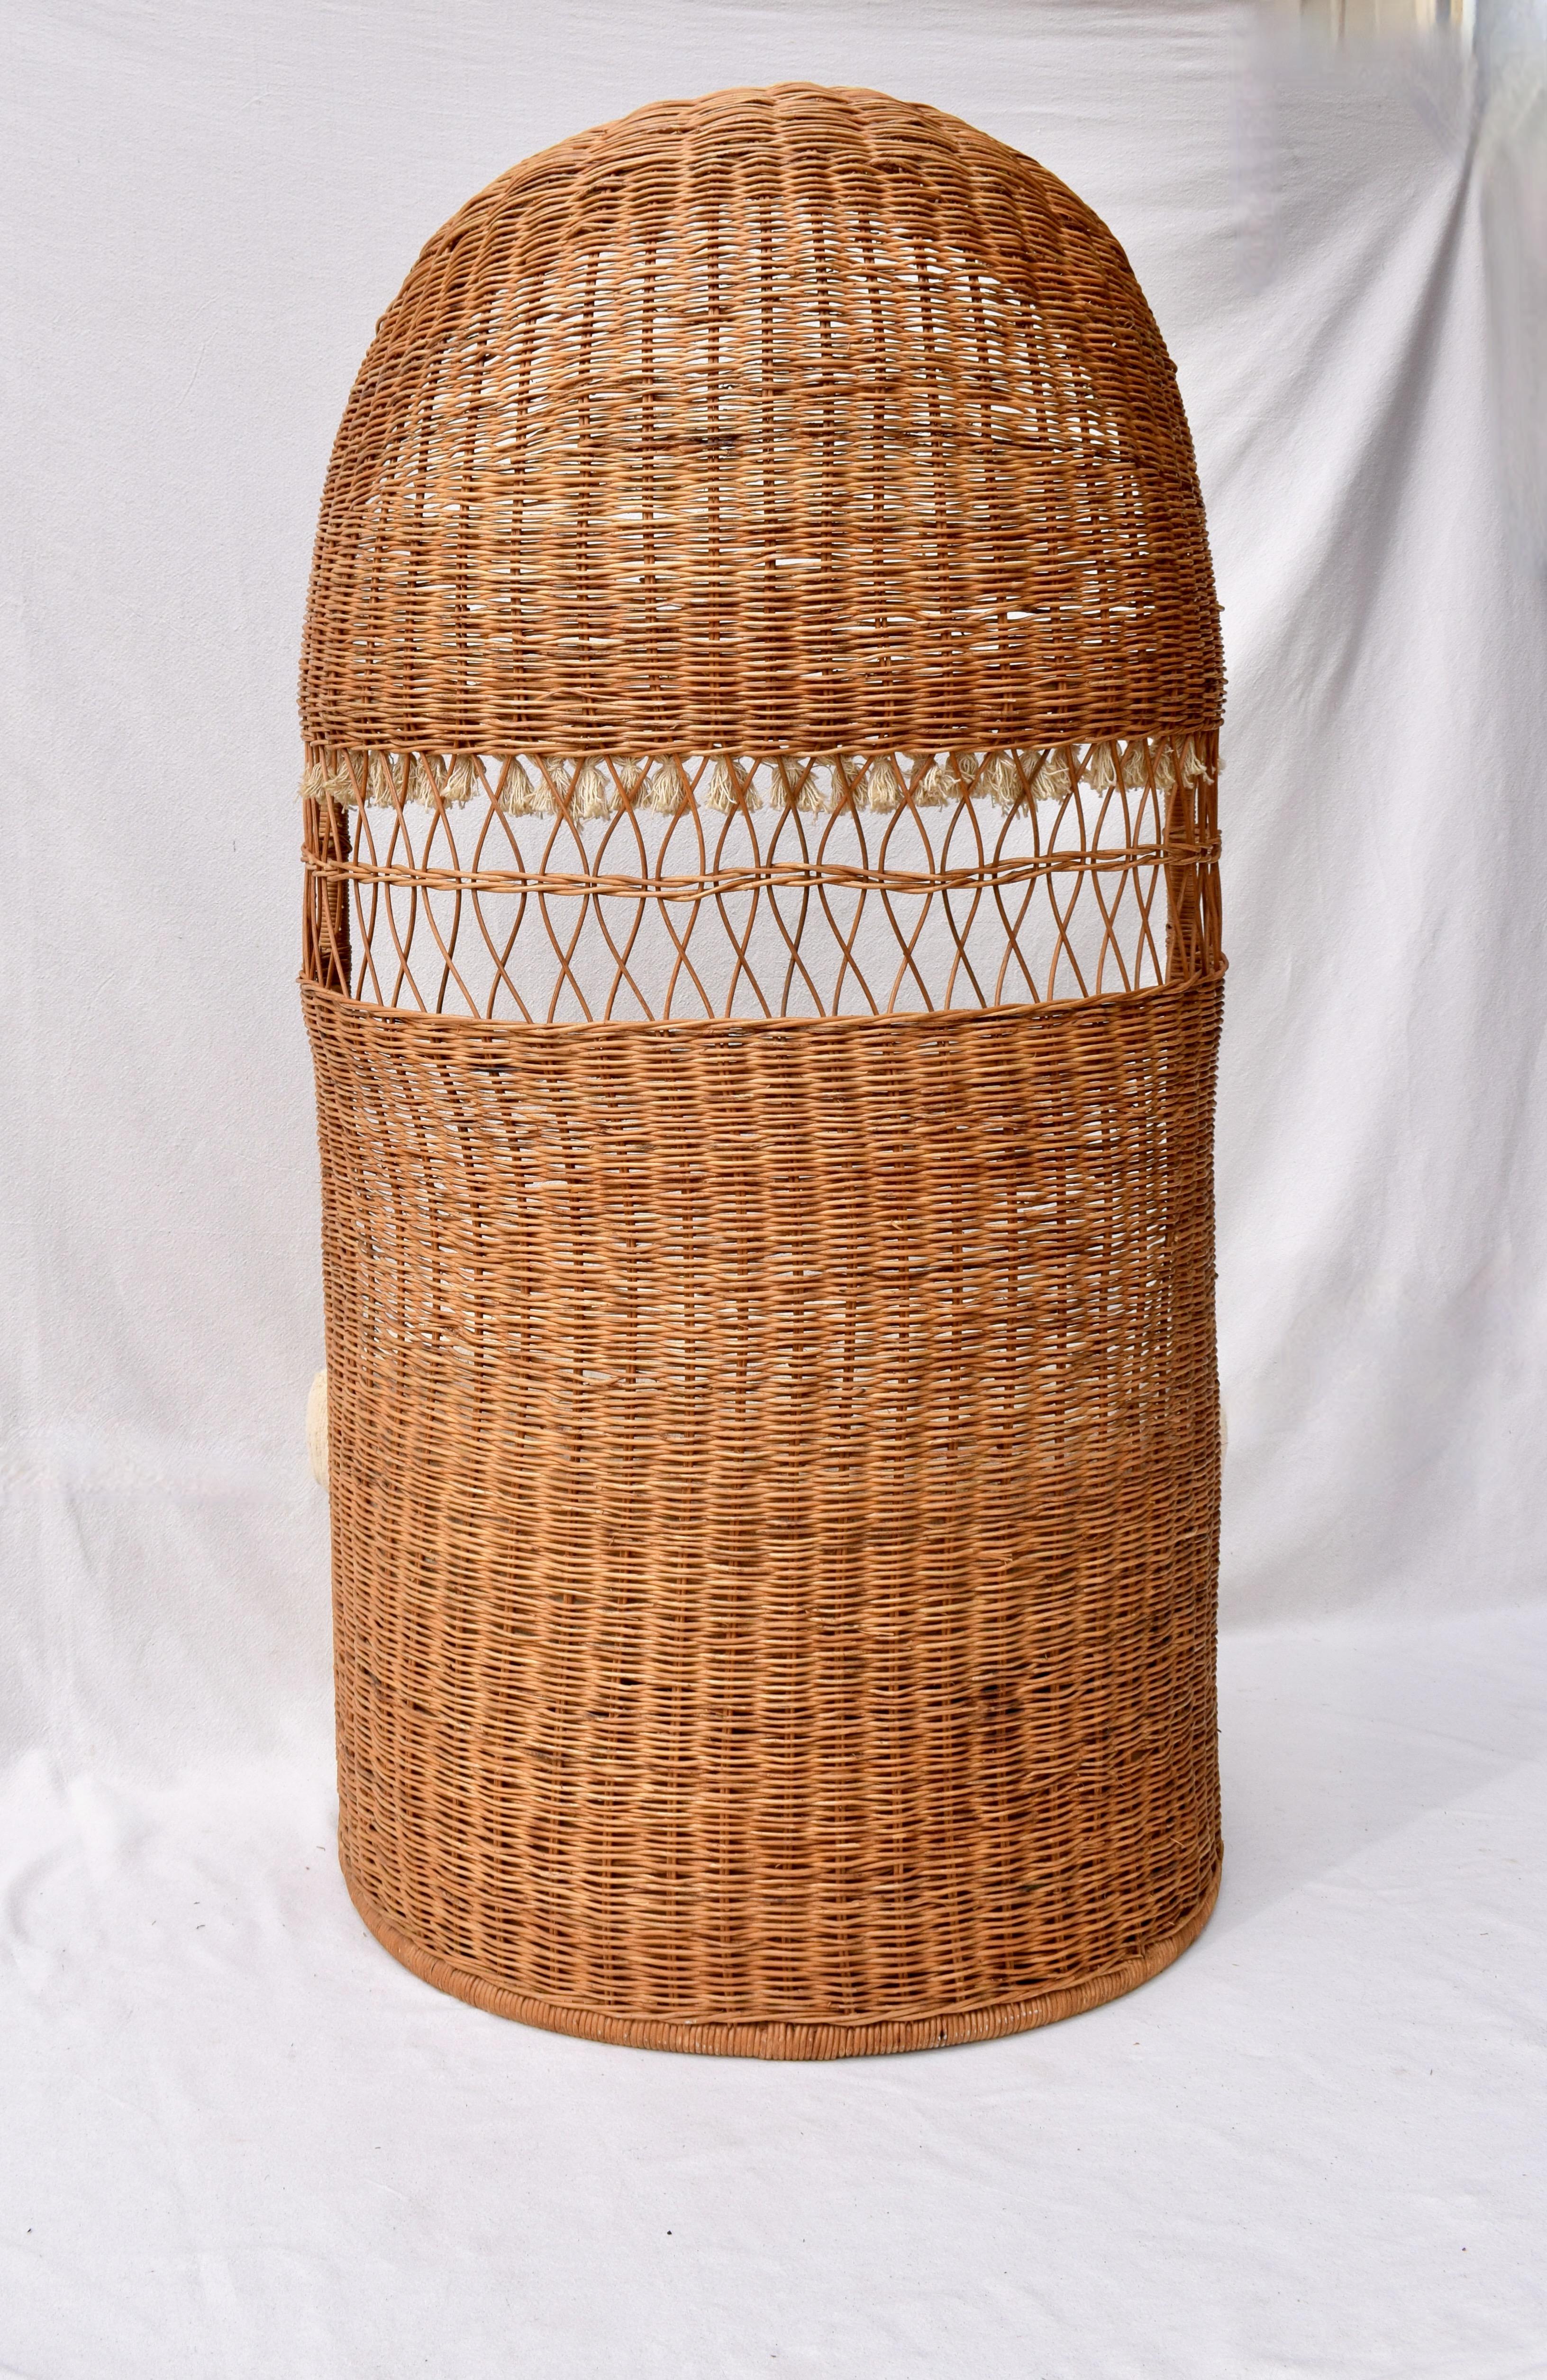 Hand-Woven Vintage Wicker Dome Hooded Chair